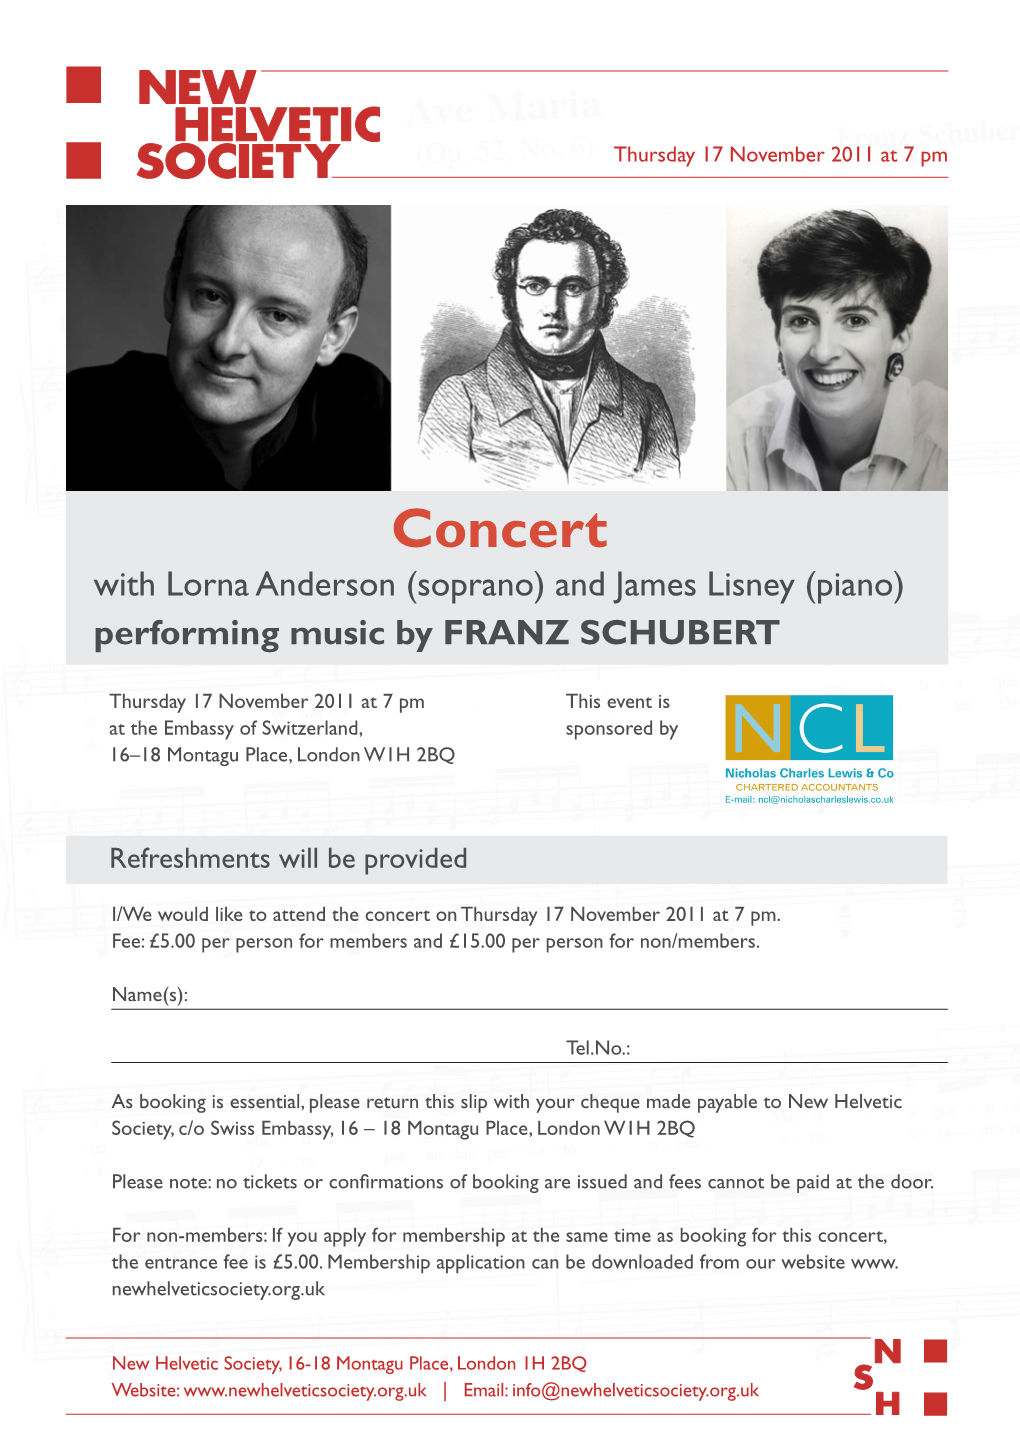 Concert with Lorna Anderson (Soprano) and James Lisney (Piano) Performing Music by FRANZ SCHUBERT